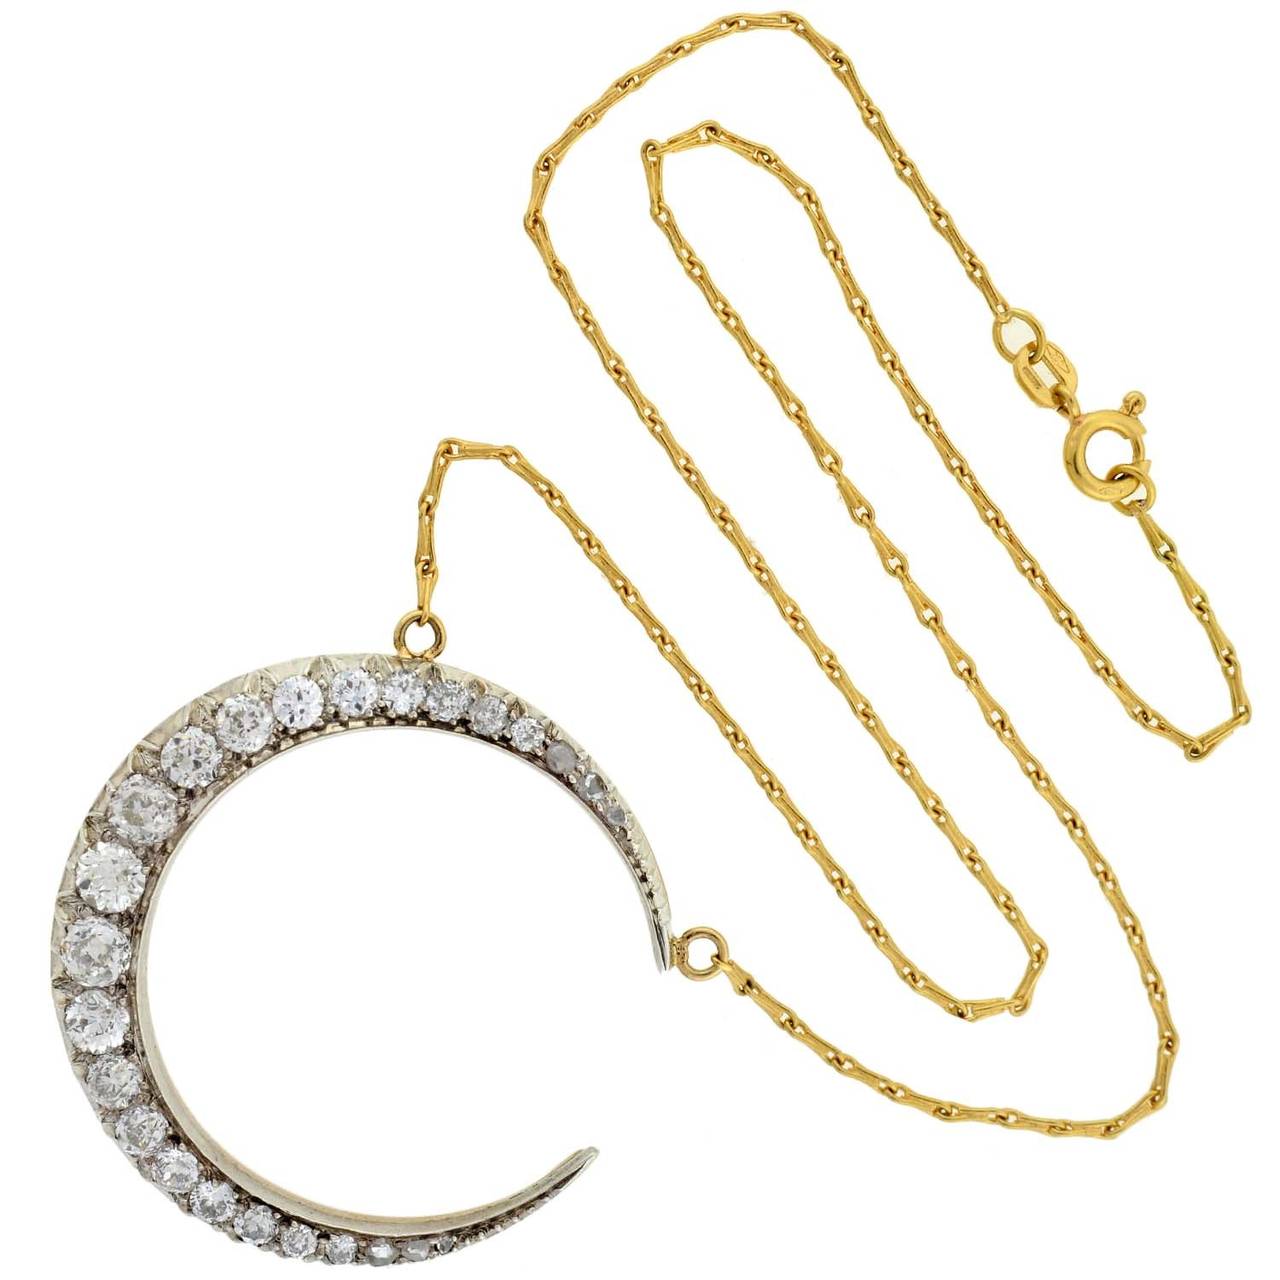 This diamond crescent necklace from the Victorian era (ca1880) is absolutely breathtaking! Made of sterling-topped 18kt gold, this gorgeous necklace is comprised of a single crescent moon pendant that hangs from a vibrant yellow gold chain. The